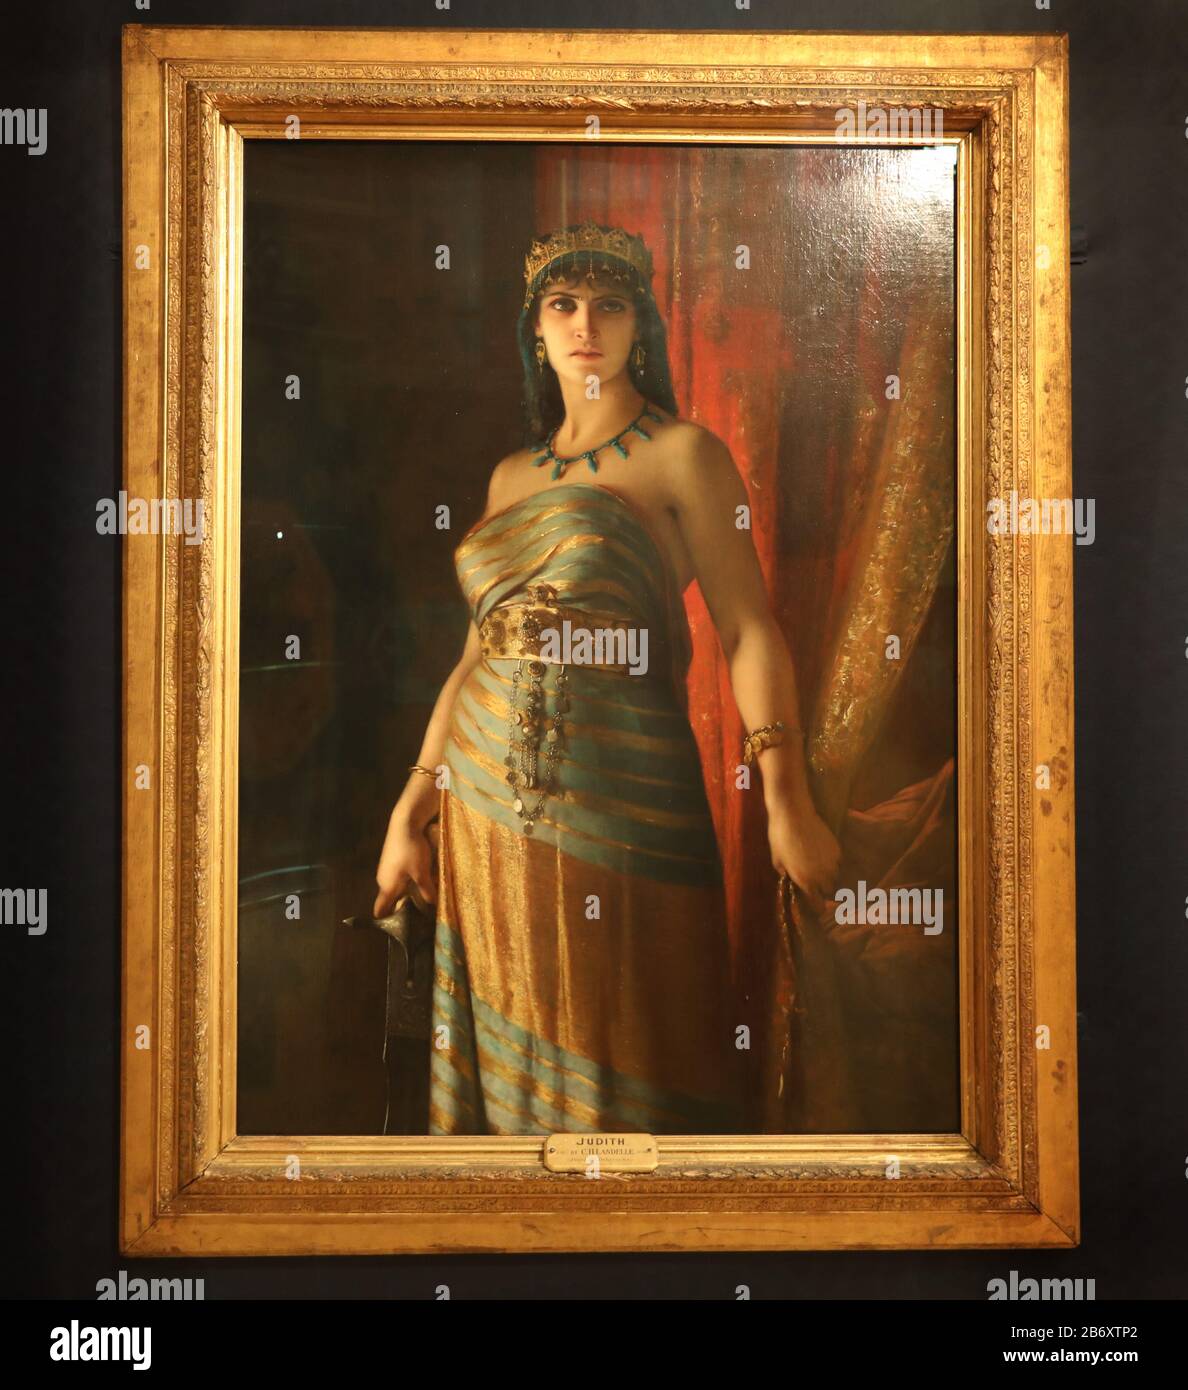 The oil on canvas painting Judith by artist Charles Landelle at The Enchanted Interior exhibition at the Guildhall Art Gallery, London, which features works from Pre-Raphaelites Edward Burne-Jones, Dante Gabriel Rosetti and Evelyn Morgan. Stock Photo